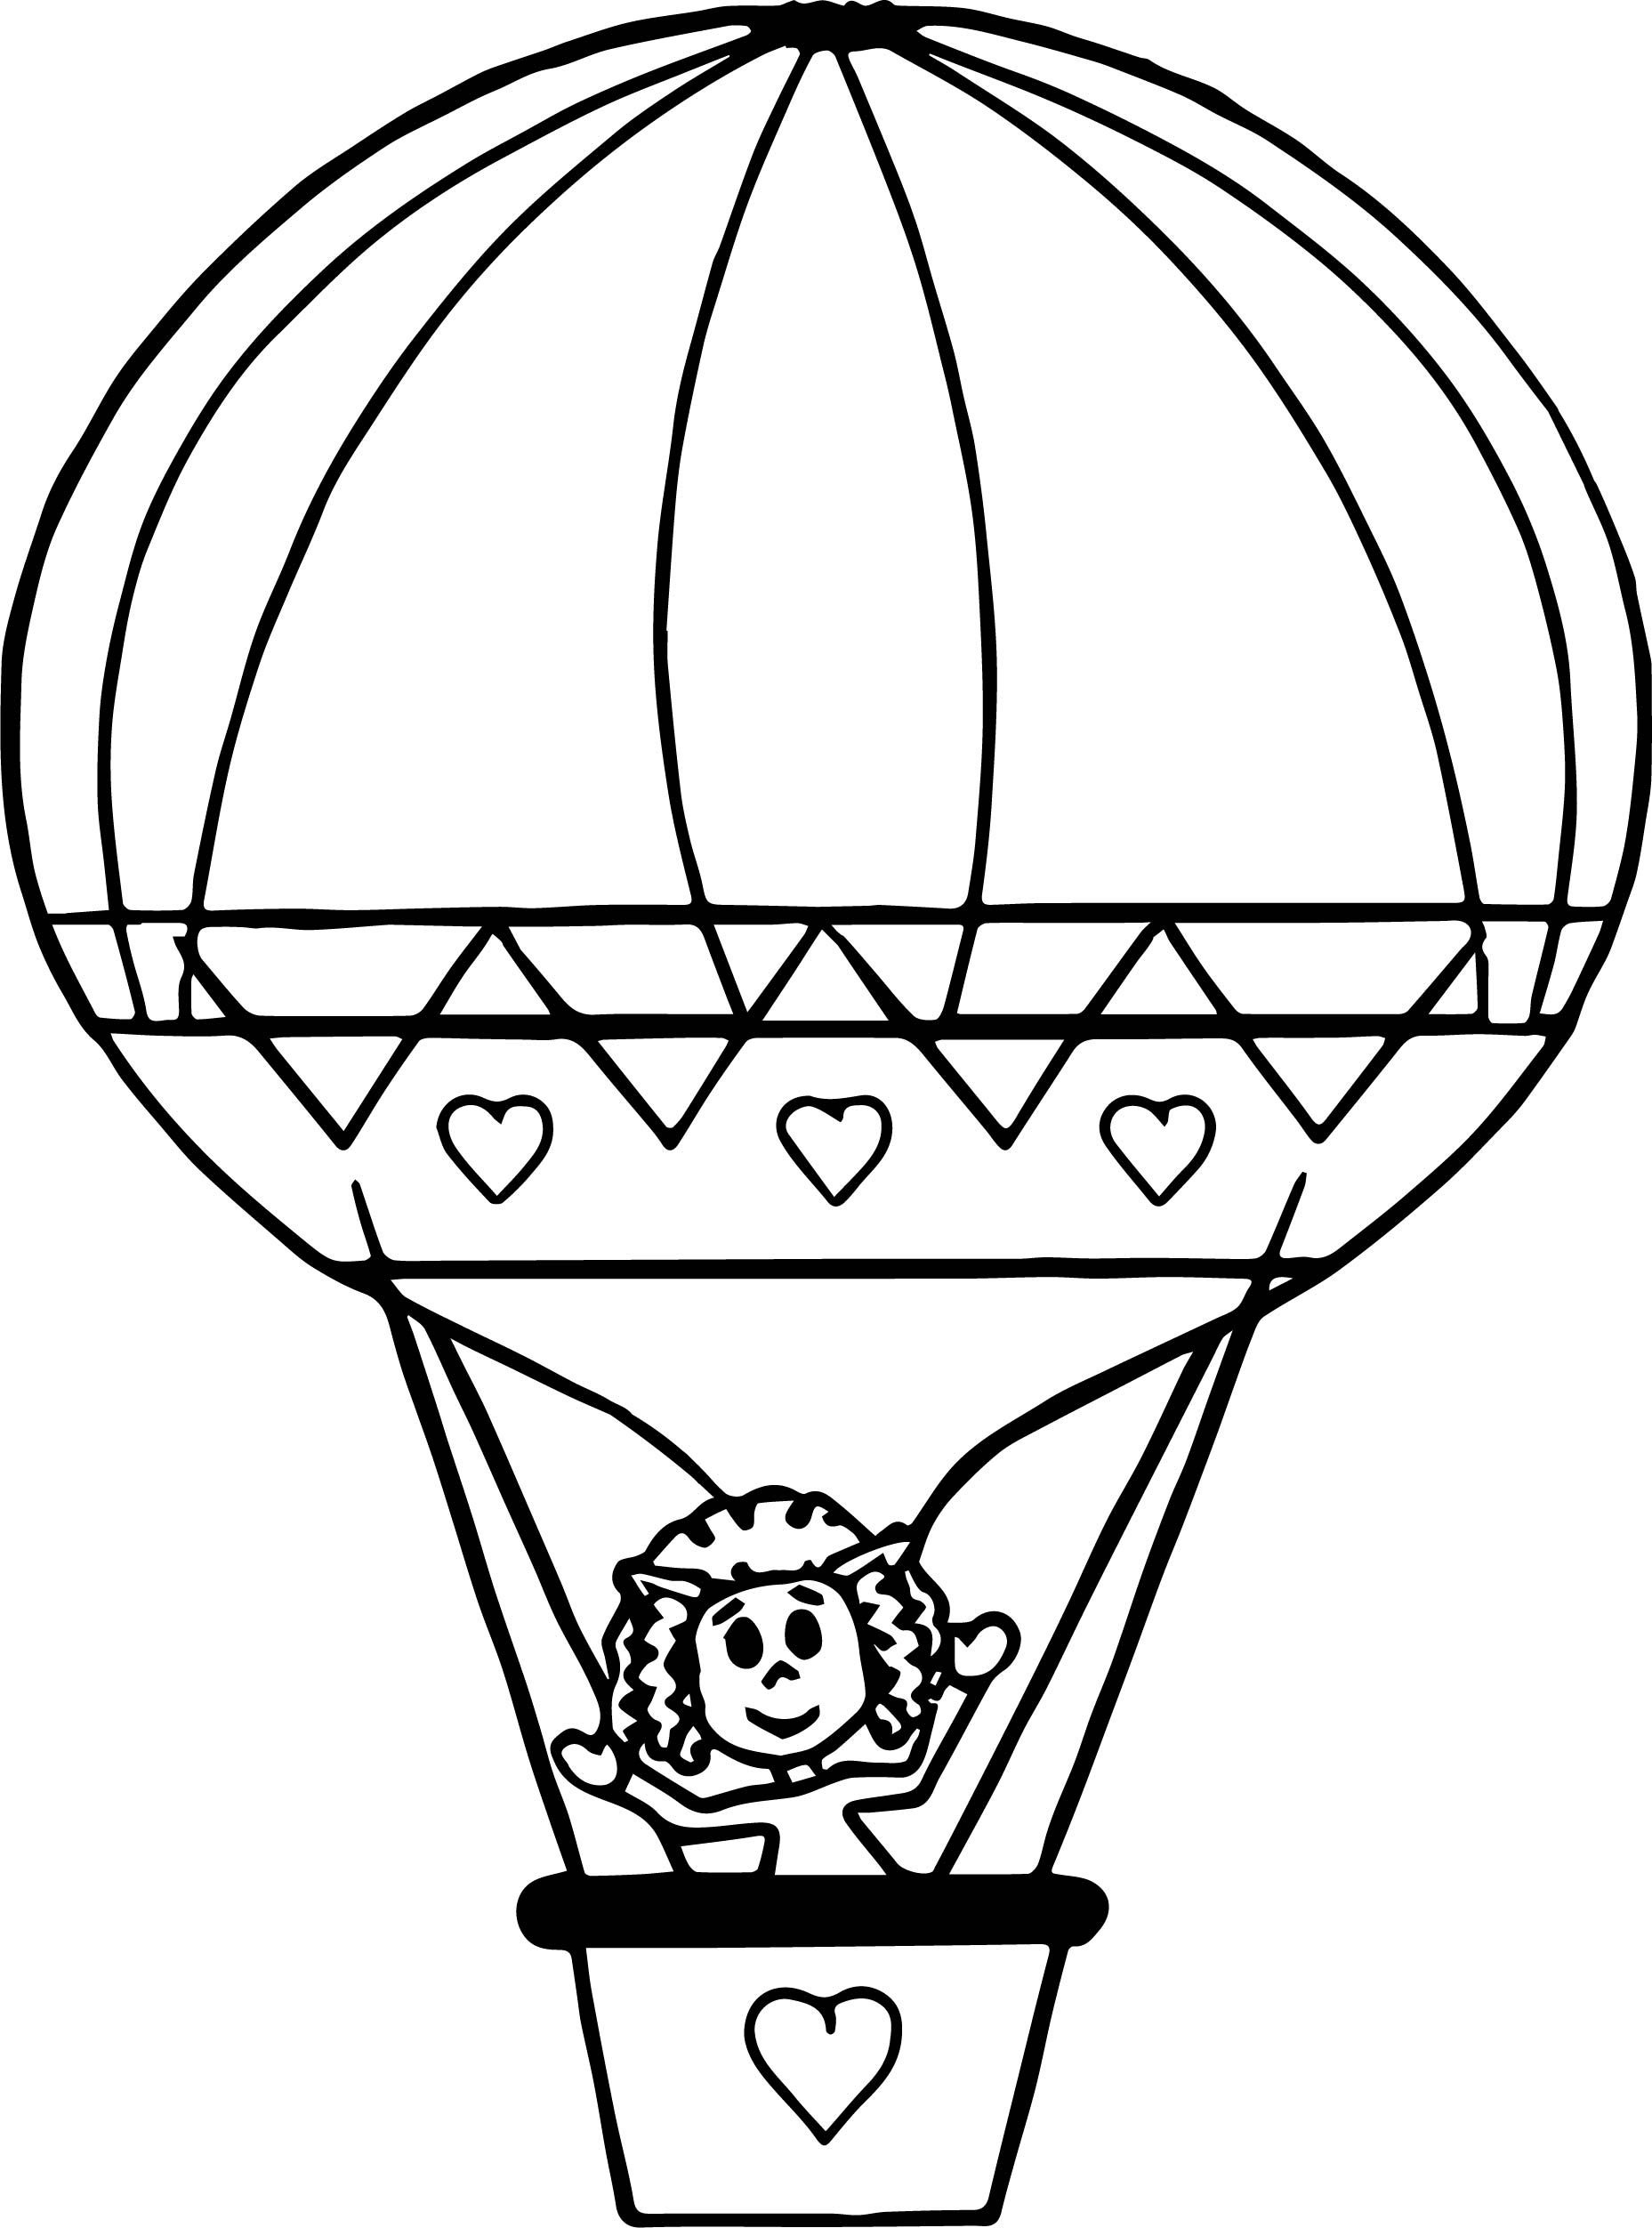 Balloon Coloring Pages Printable at GetColorings.com | Free printable